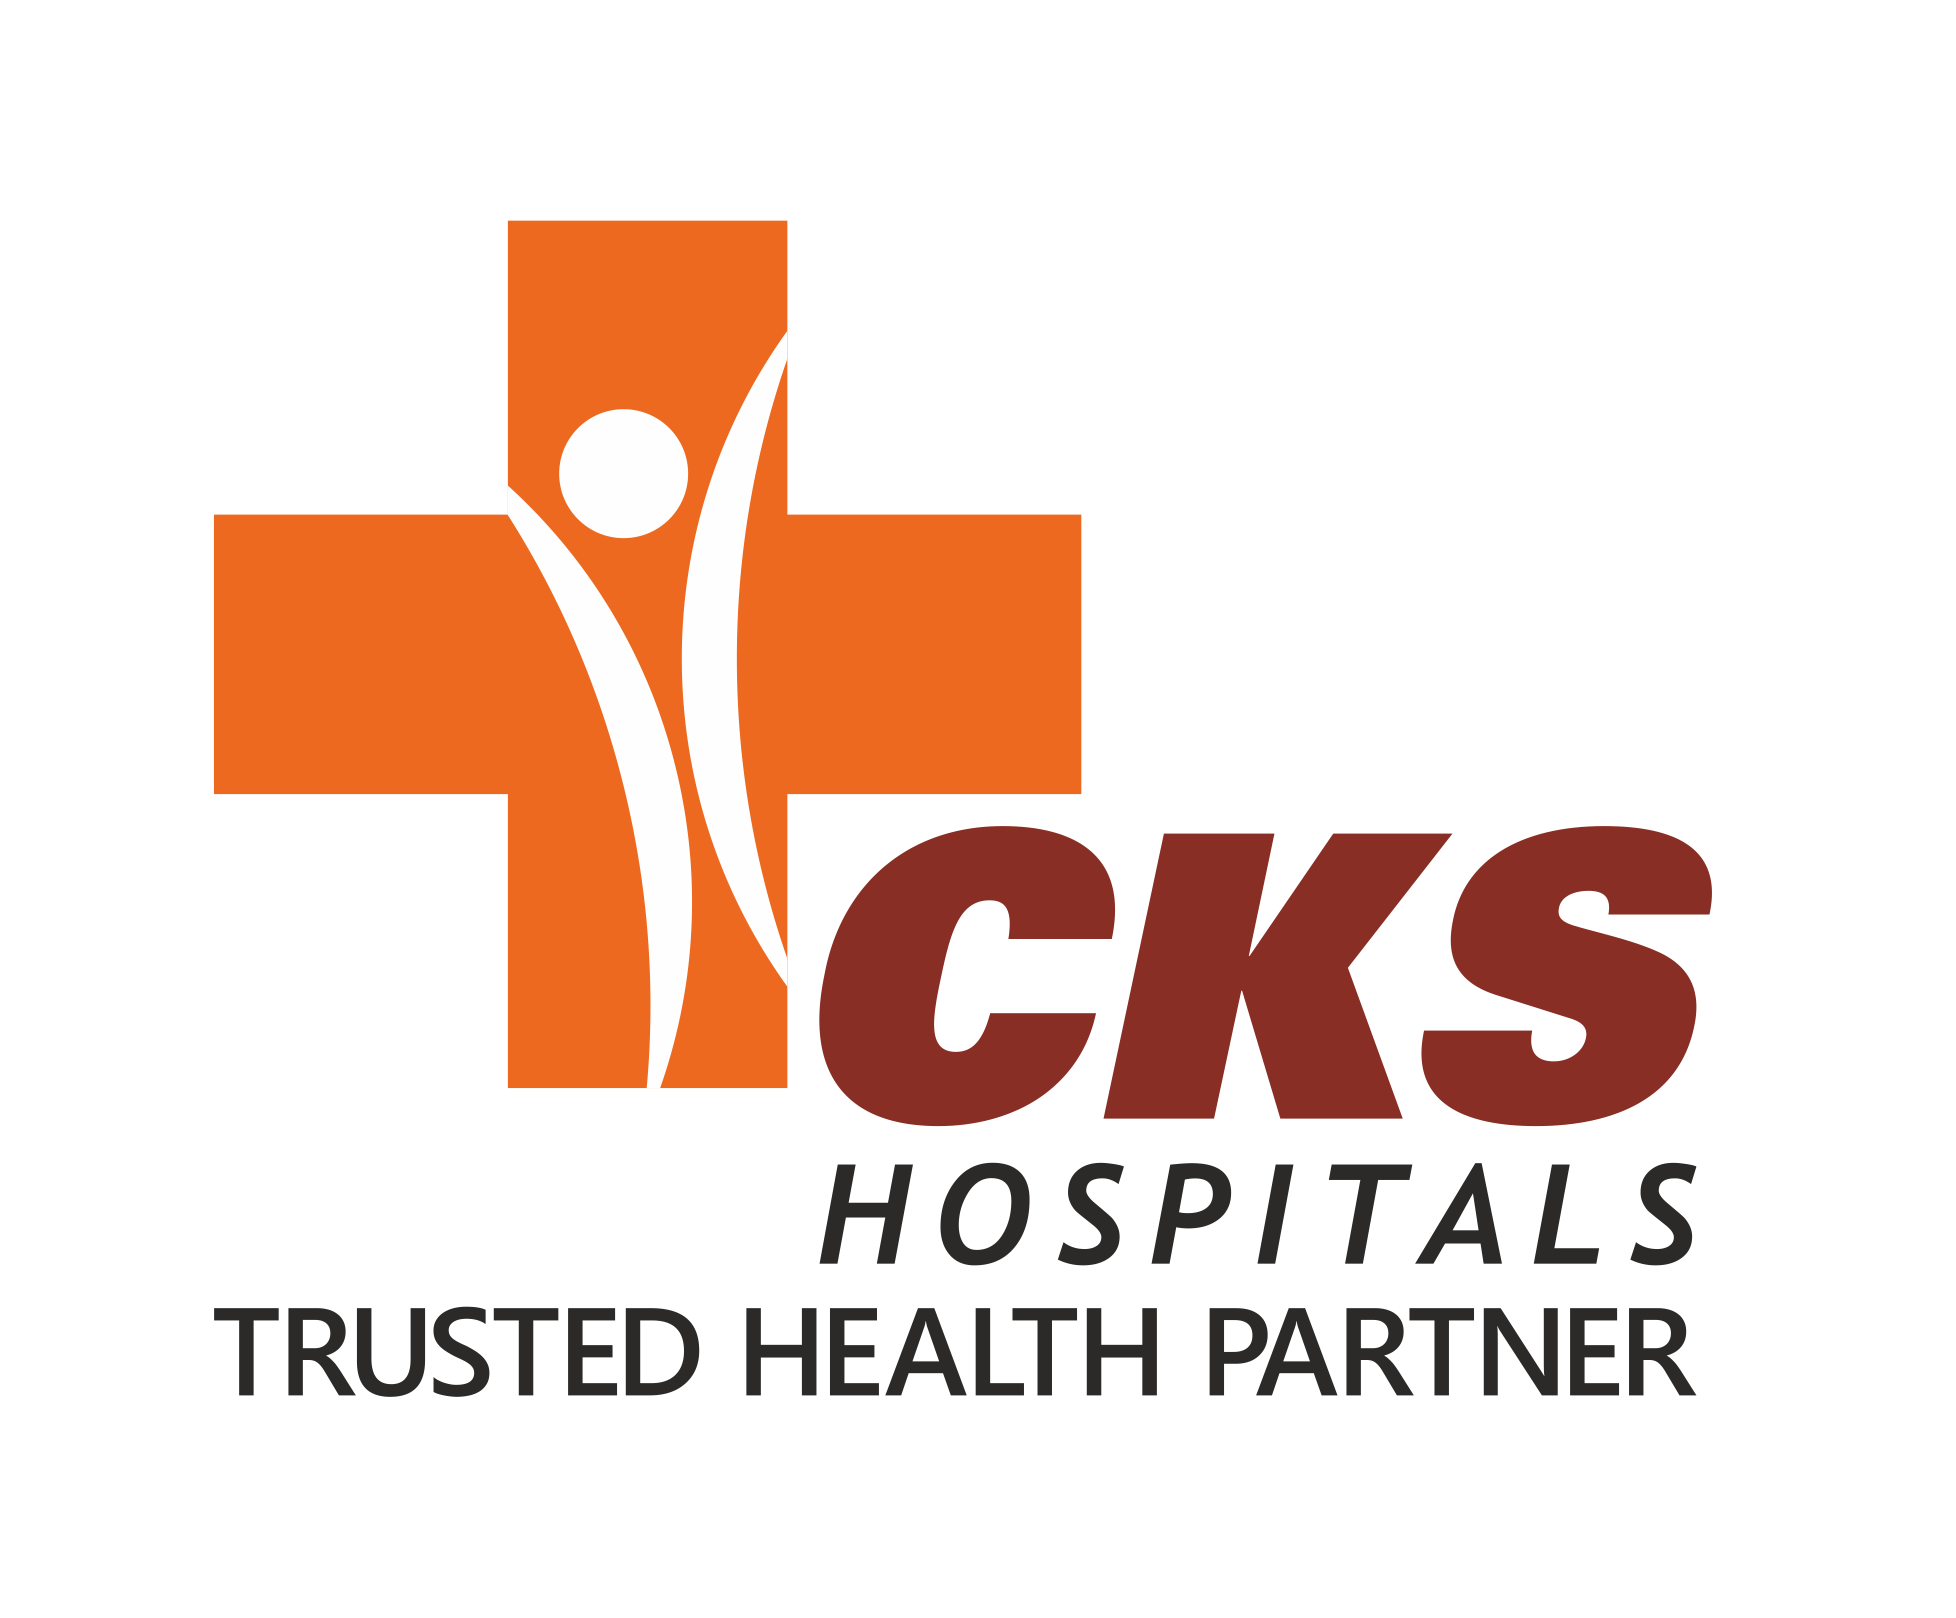 Johns Automation and Electrical Panel Customer - cks hospitals